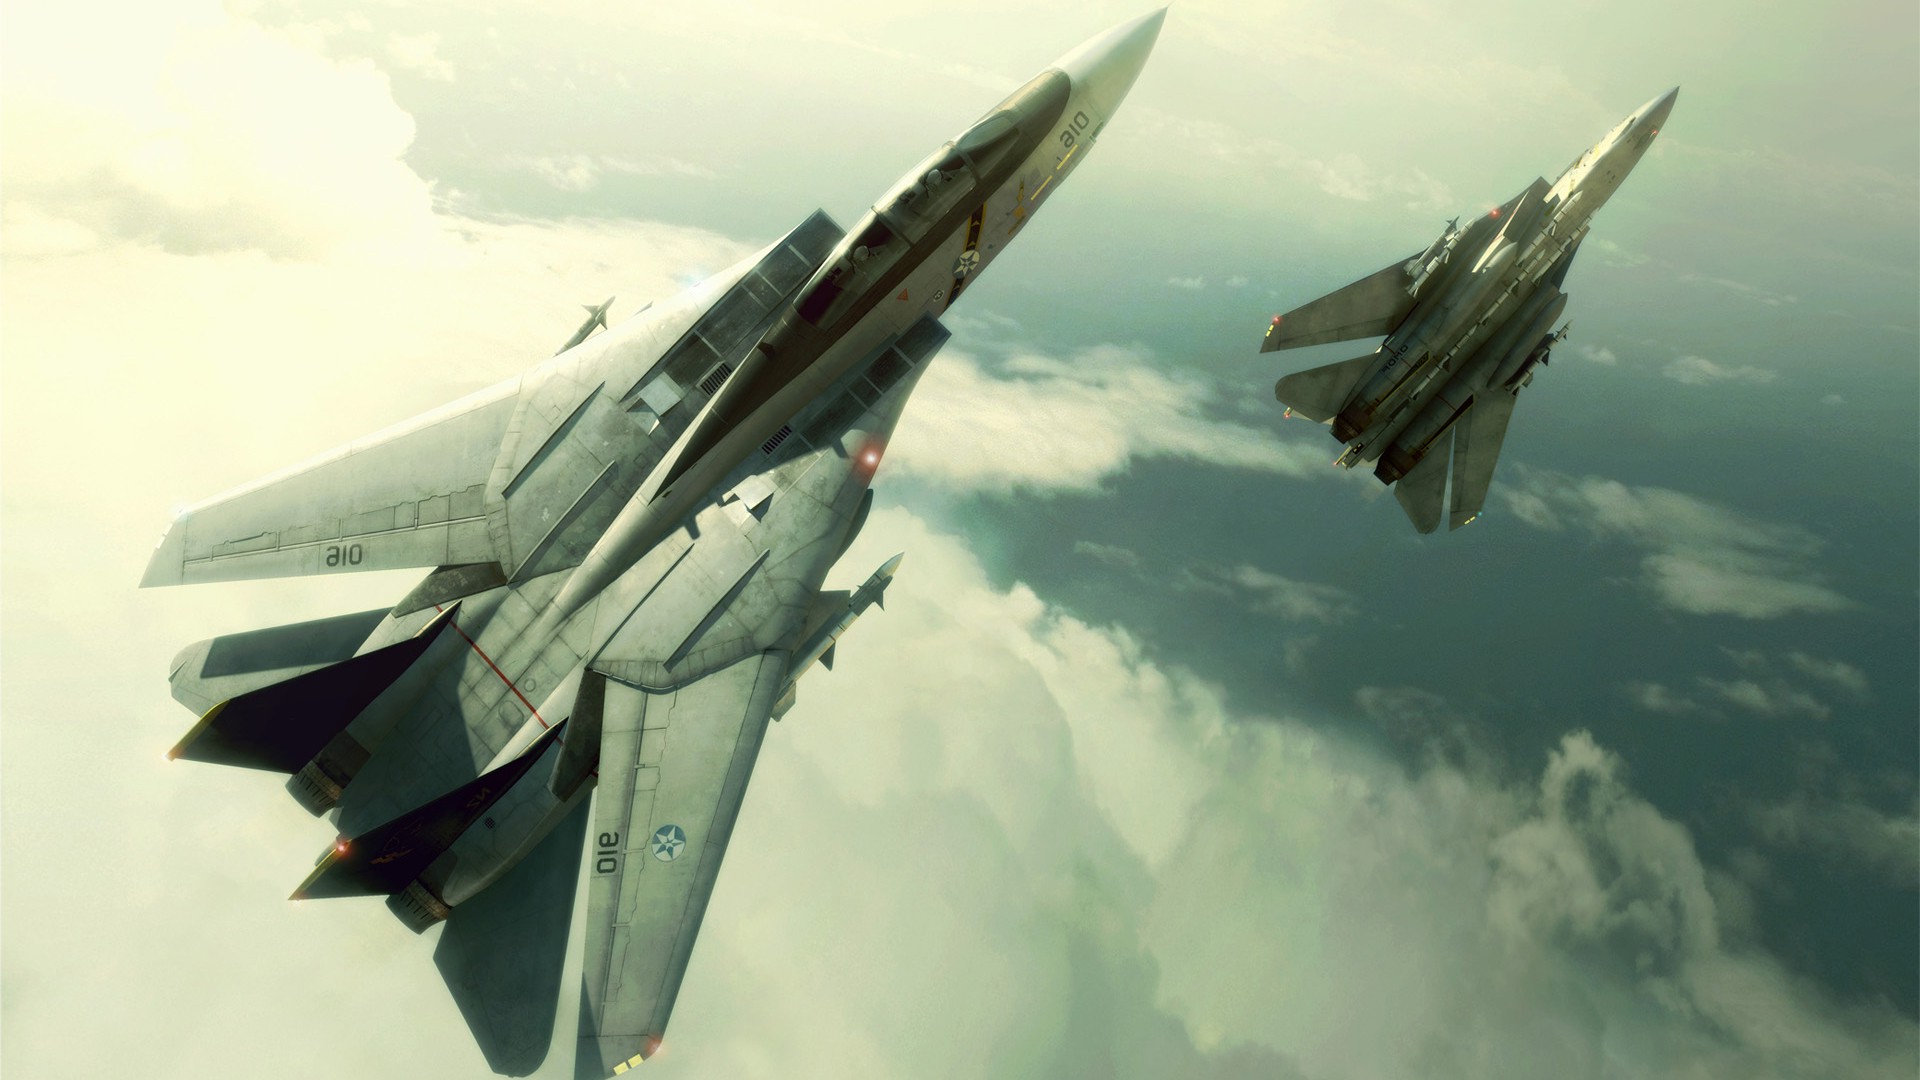 CGI, Video Games, Airplane, Aircraft, F 14 Tomcat, Ace Combat Wallpapers HD...